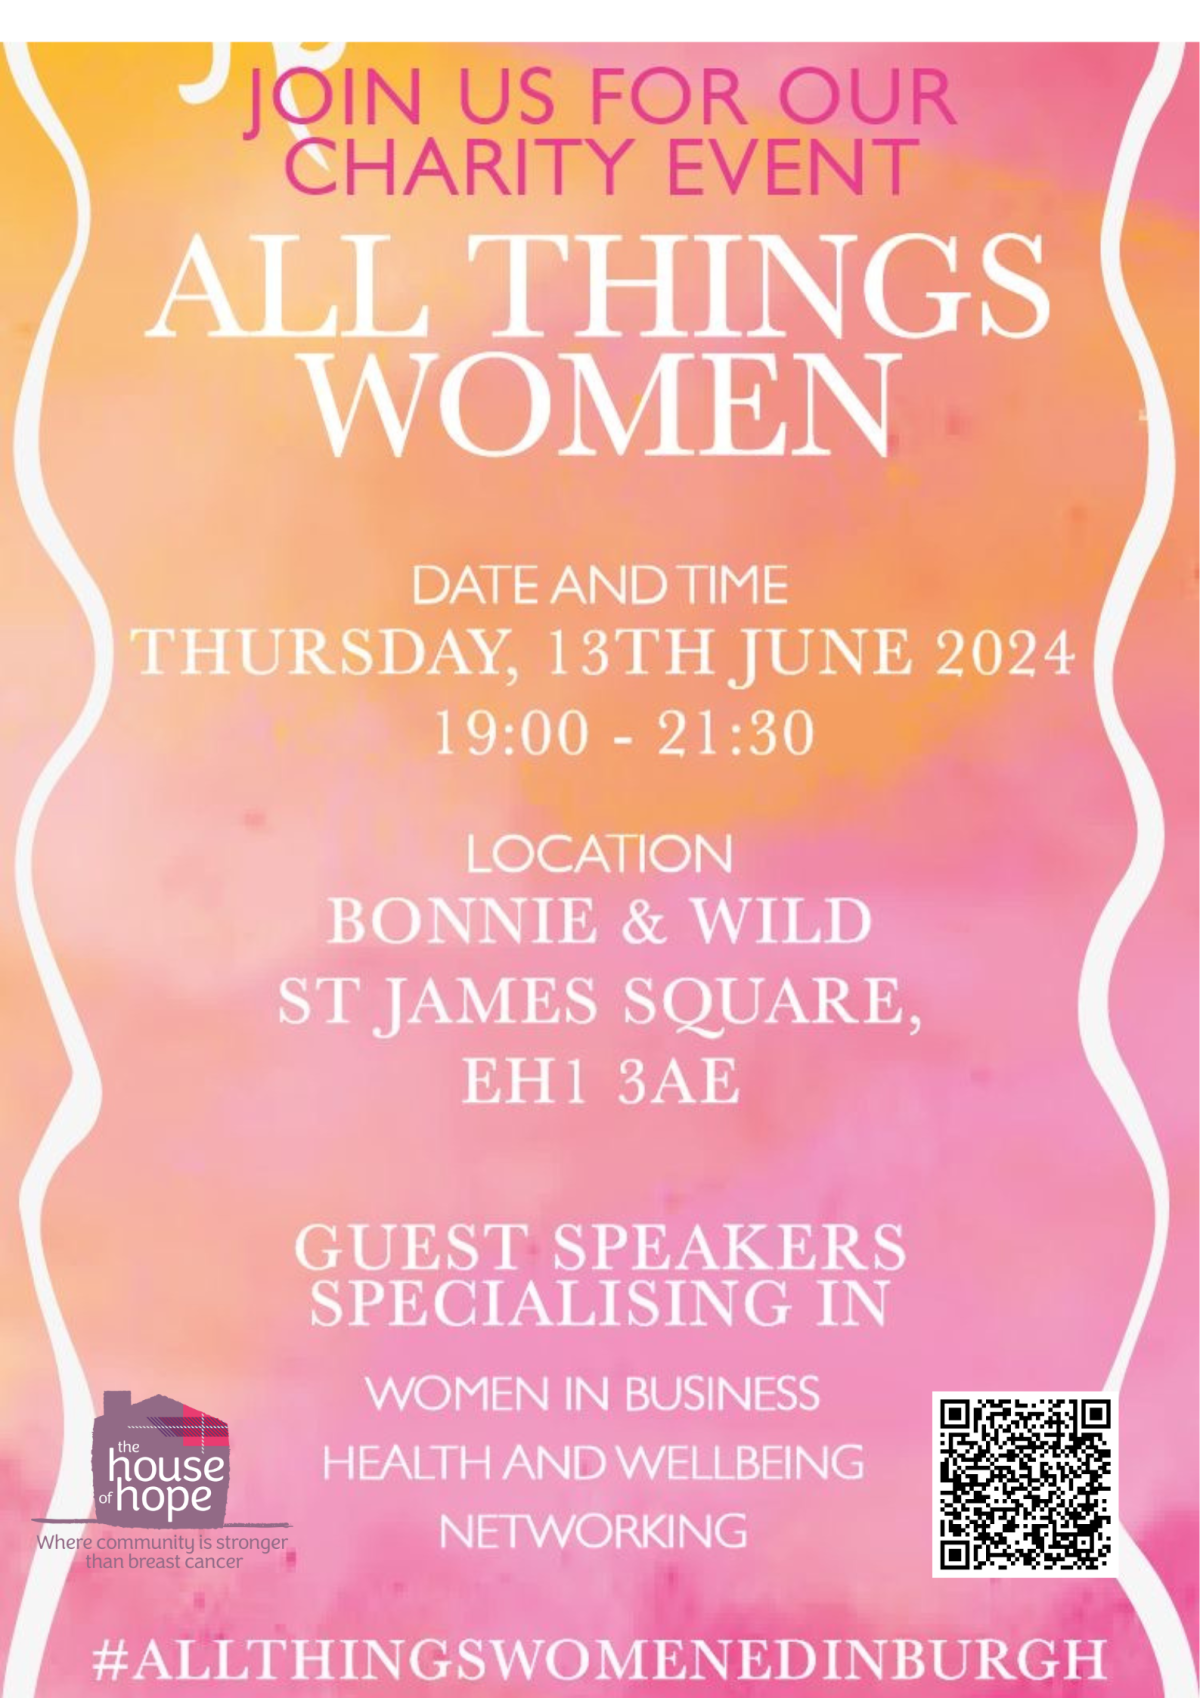 All Things Women in aid of The House of Hope